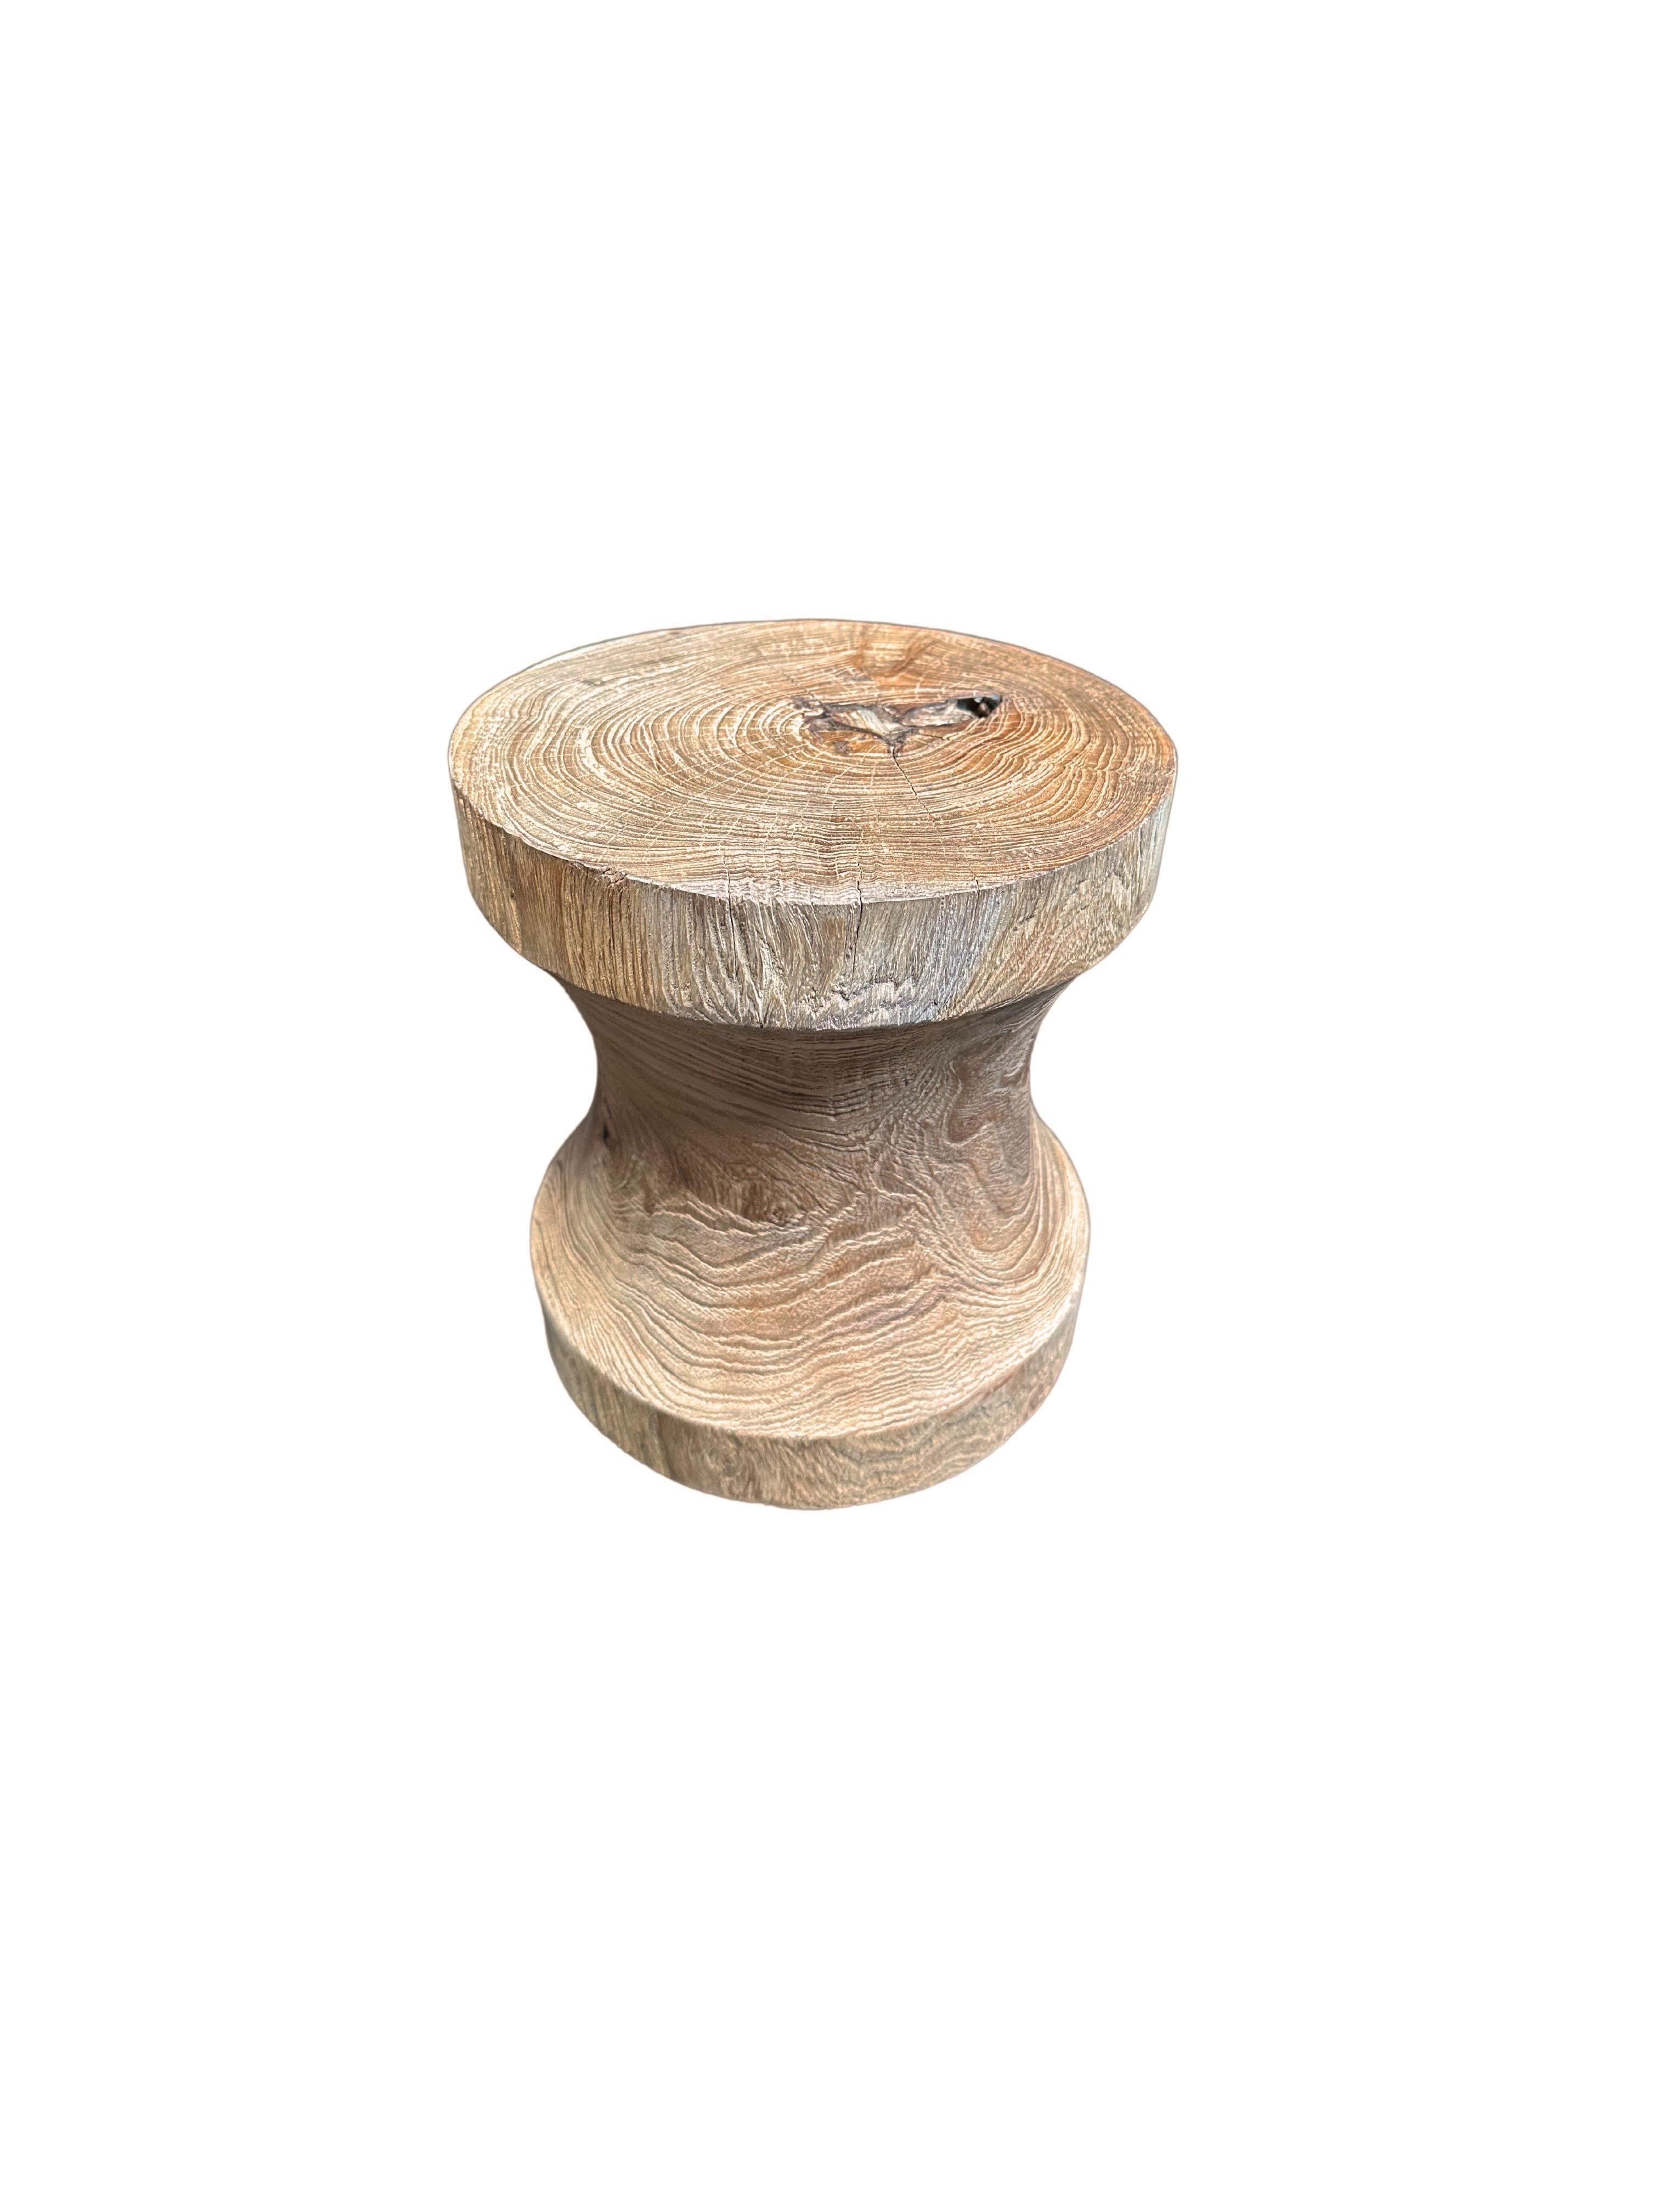 Organic Modern Sculptural Side Table Crafted from Teak Wood, With Stunning Textures For Sale